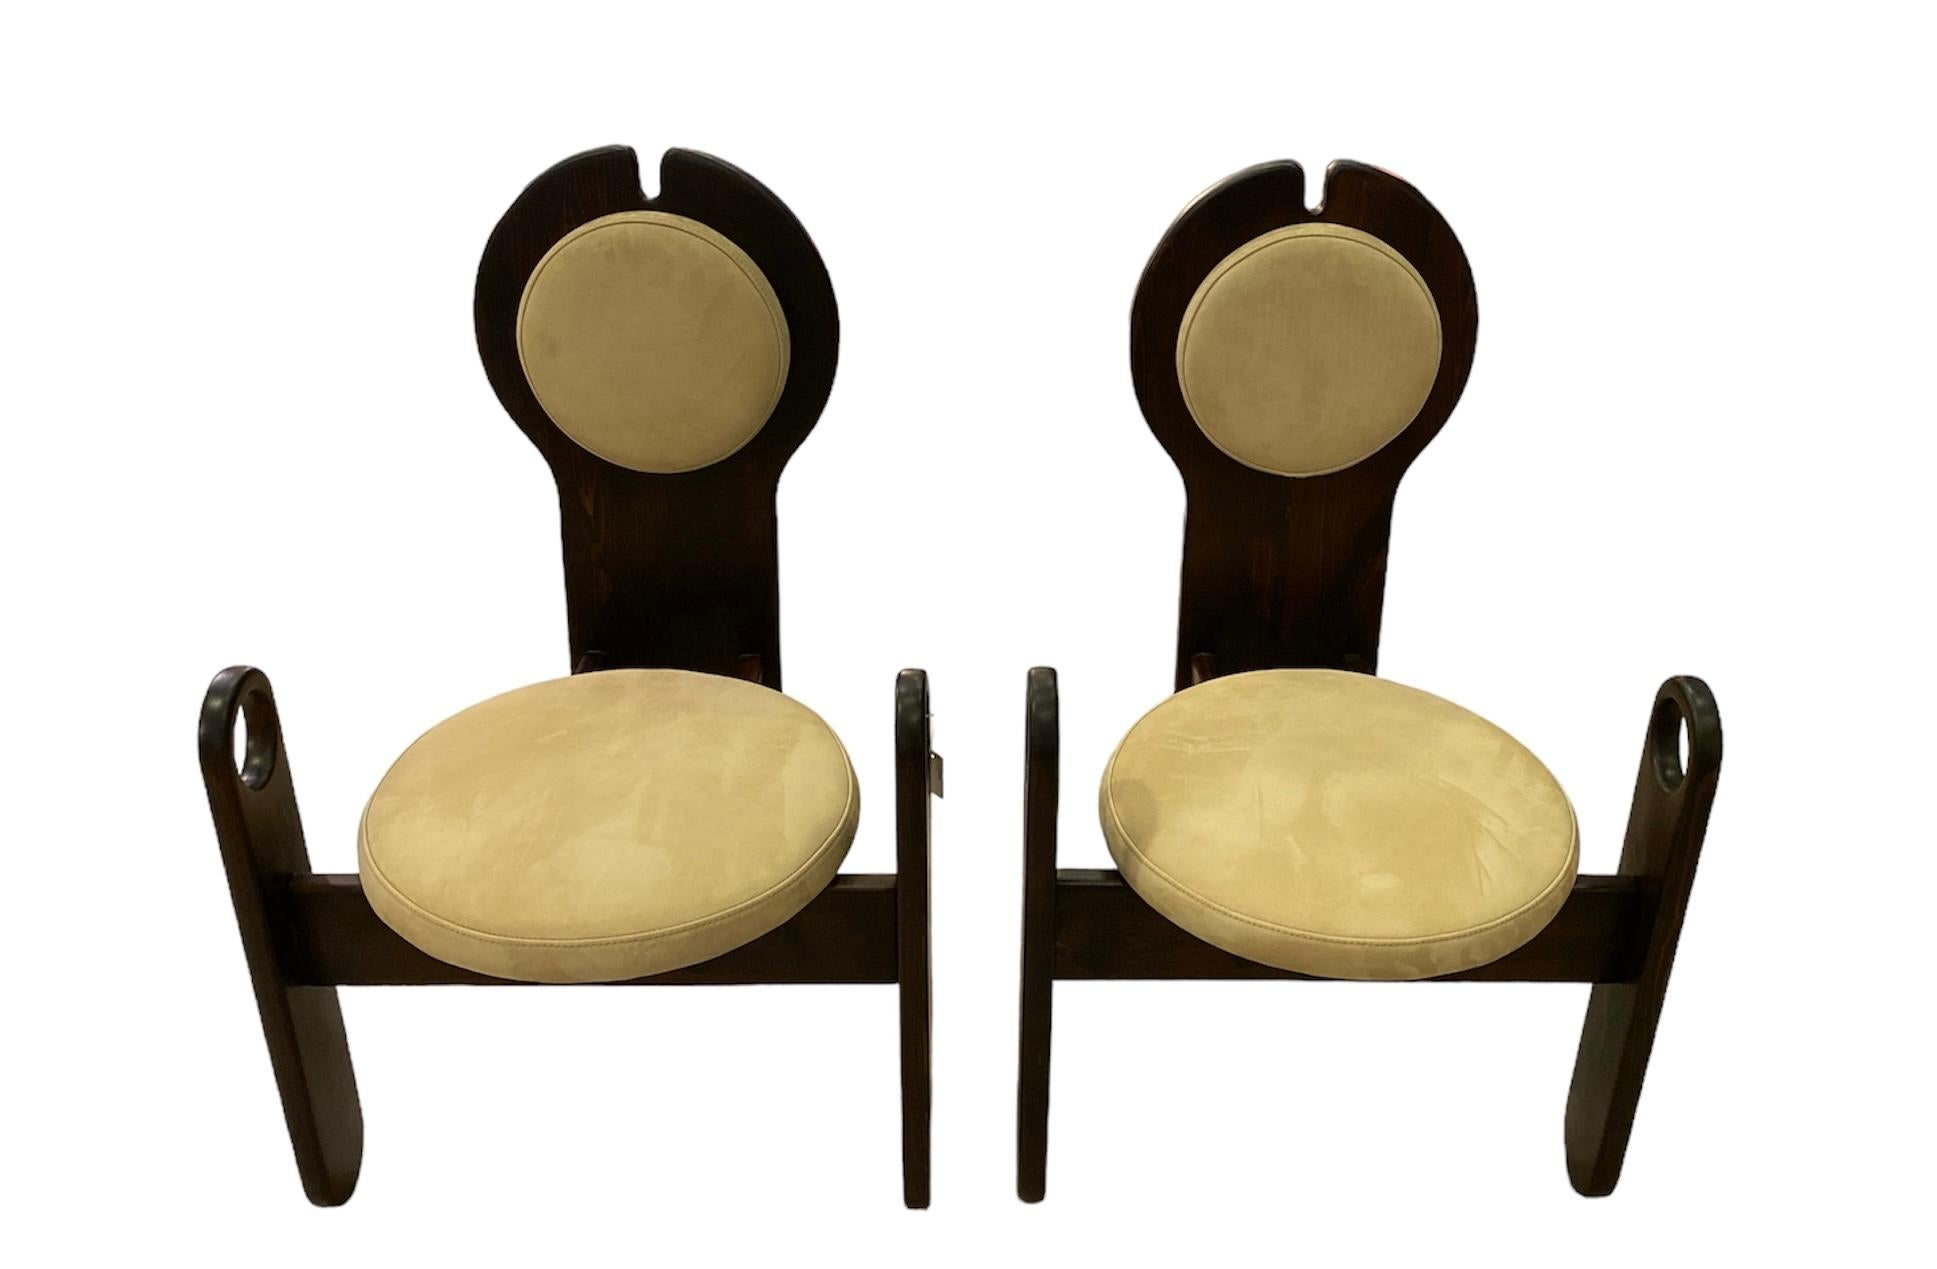 A pair of lounge chairs by Szedleczky Design. Signed.

Rudolf Szedleczky, Easten Europe, Hungary, c1970s.

Re-upholstered in beige nubuck leather.

Excellent condition.

